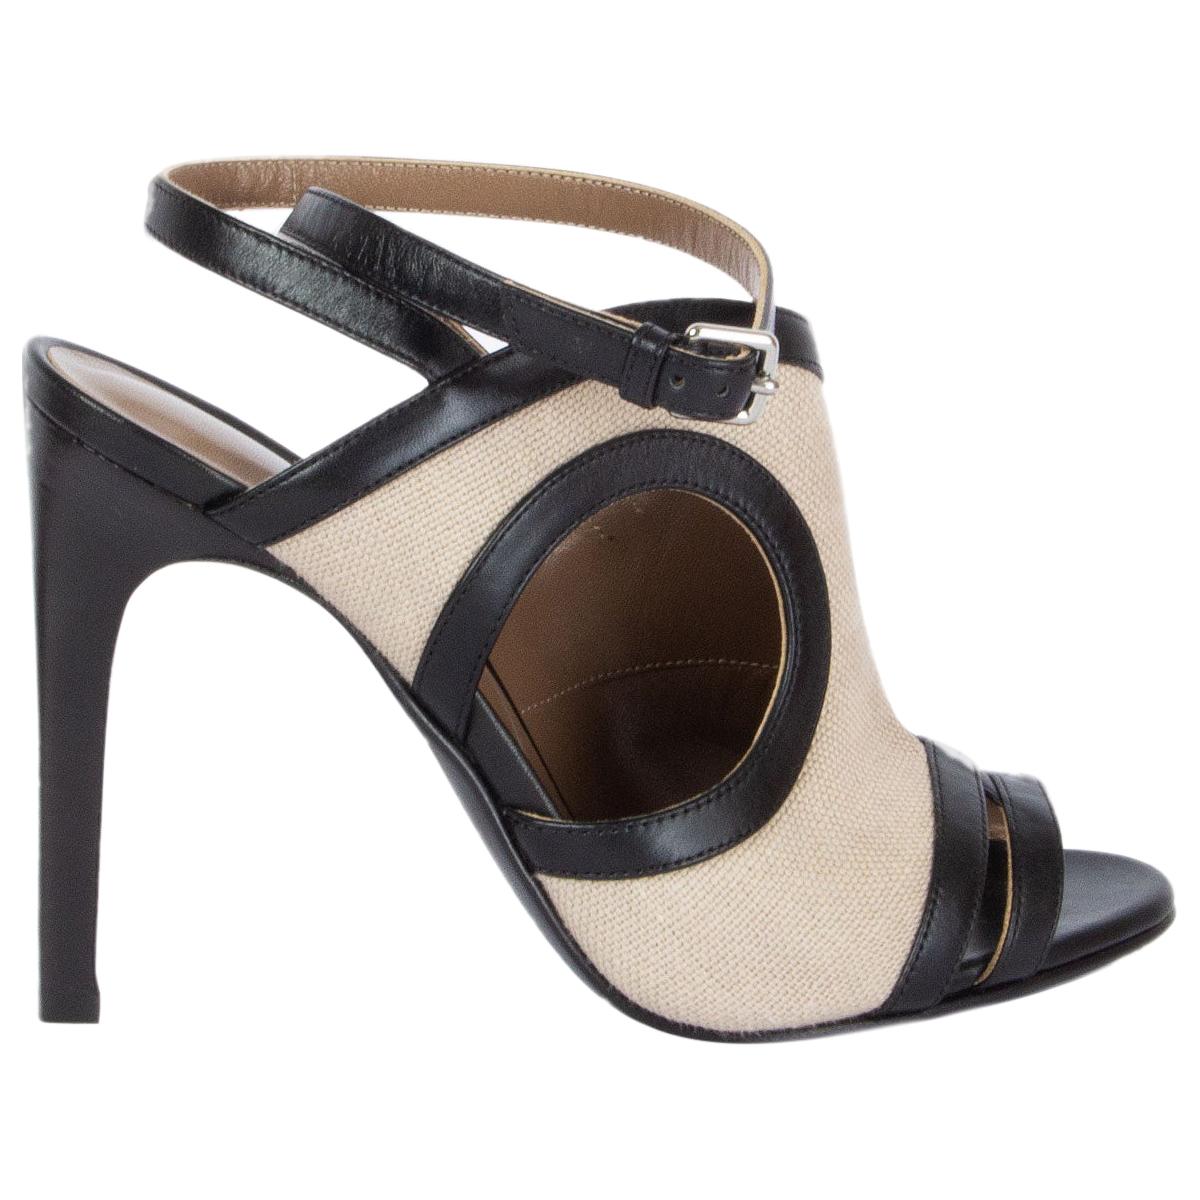 HERMES black leather & off-white canvas RAFAELLA Sandals Shoes 38 For Sale